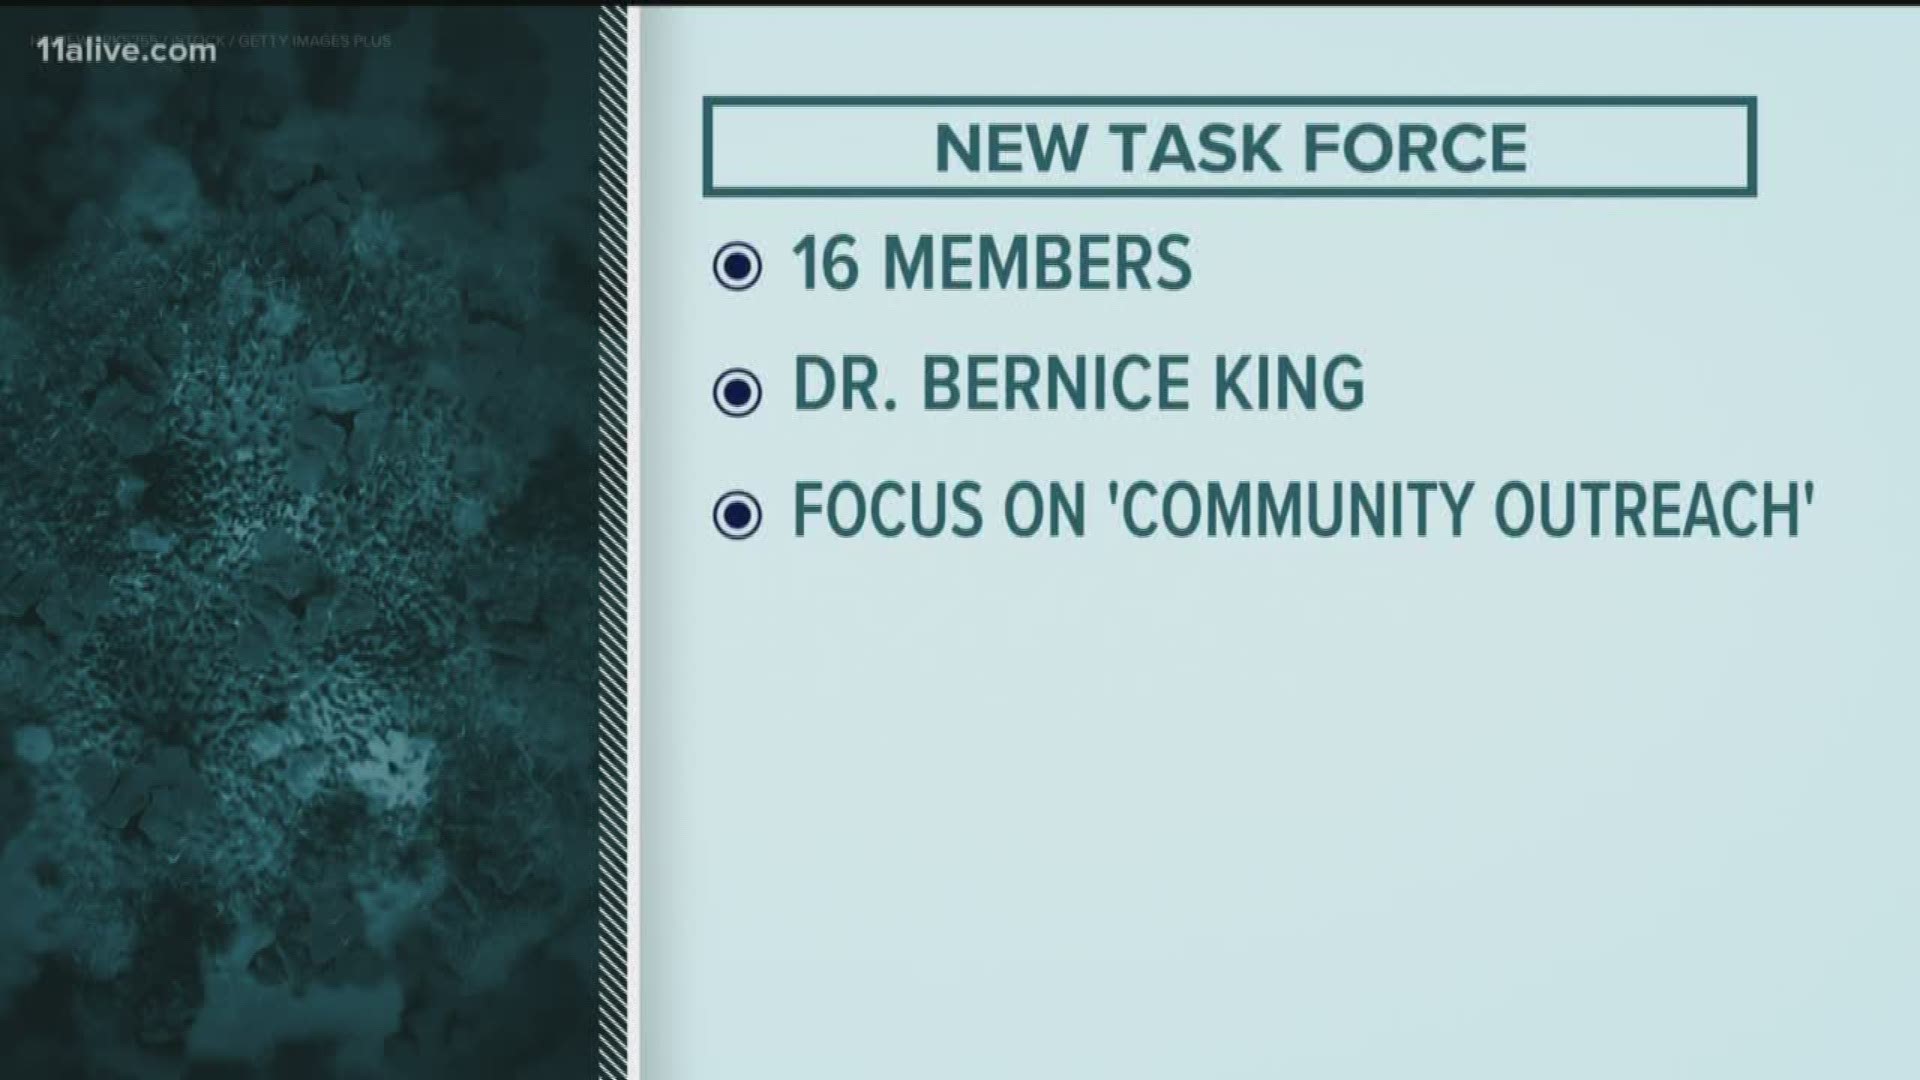 It's made up of 16 members including Dr. Bernice King who co-chairs the task force focused on community outreach.